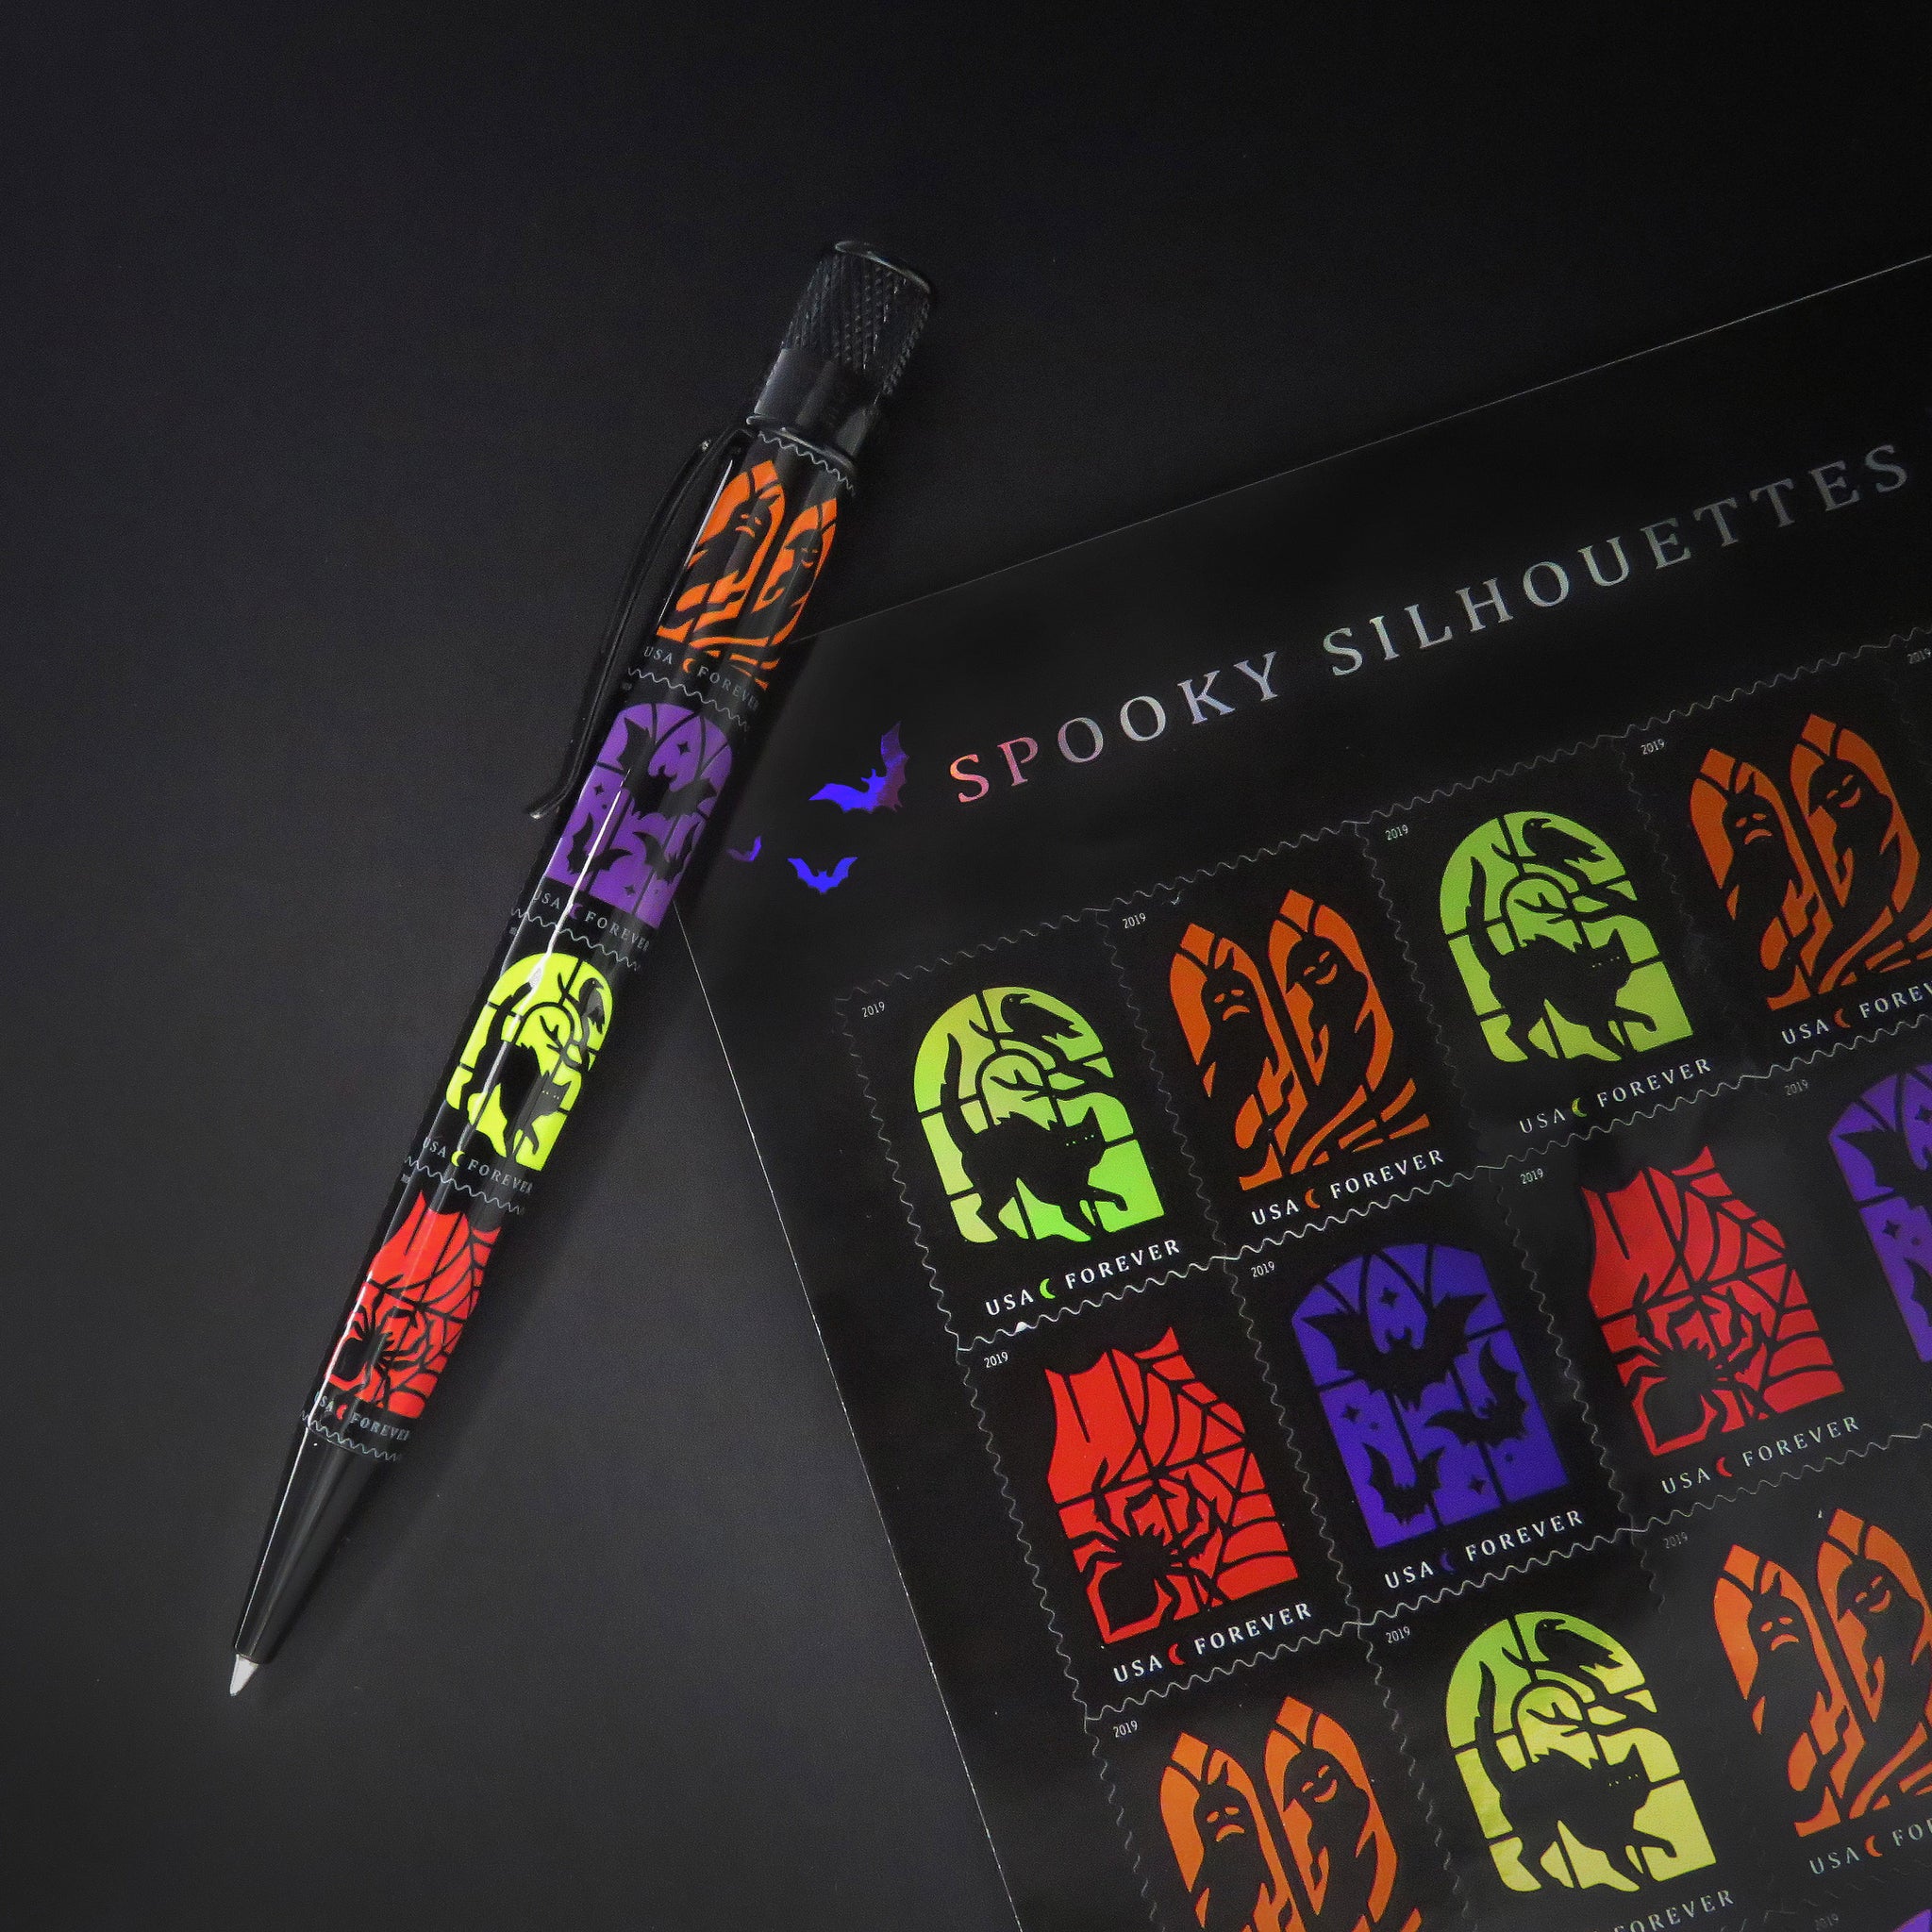 USPS® Spooky Silhouettes  LIMITED EDITION of 1031 (by Retro 51)